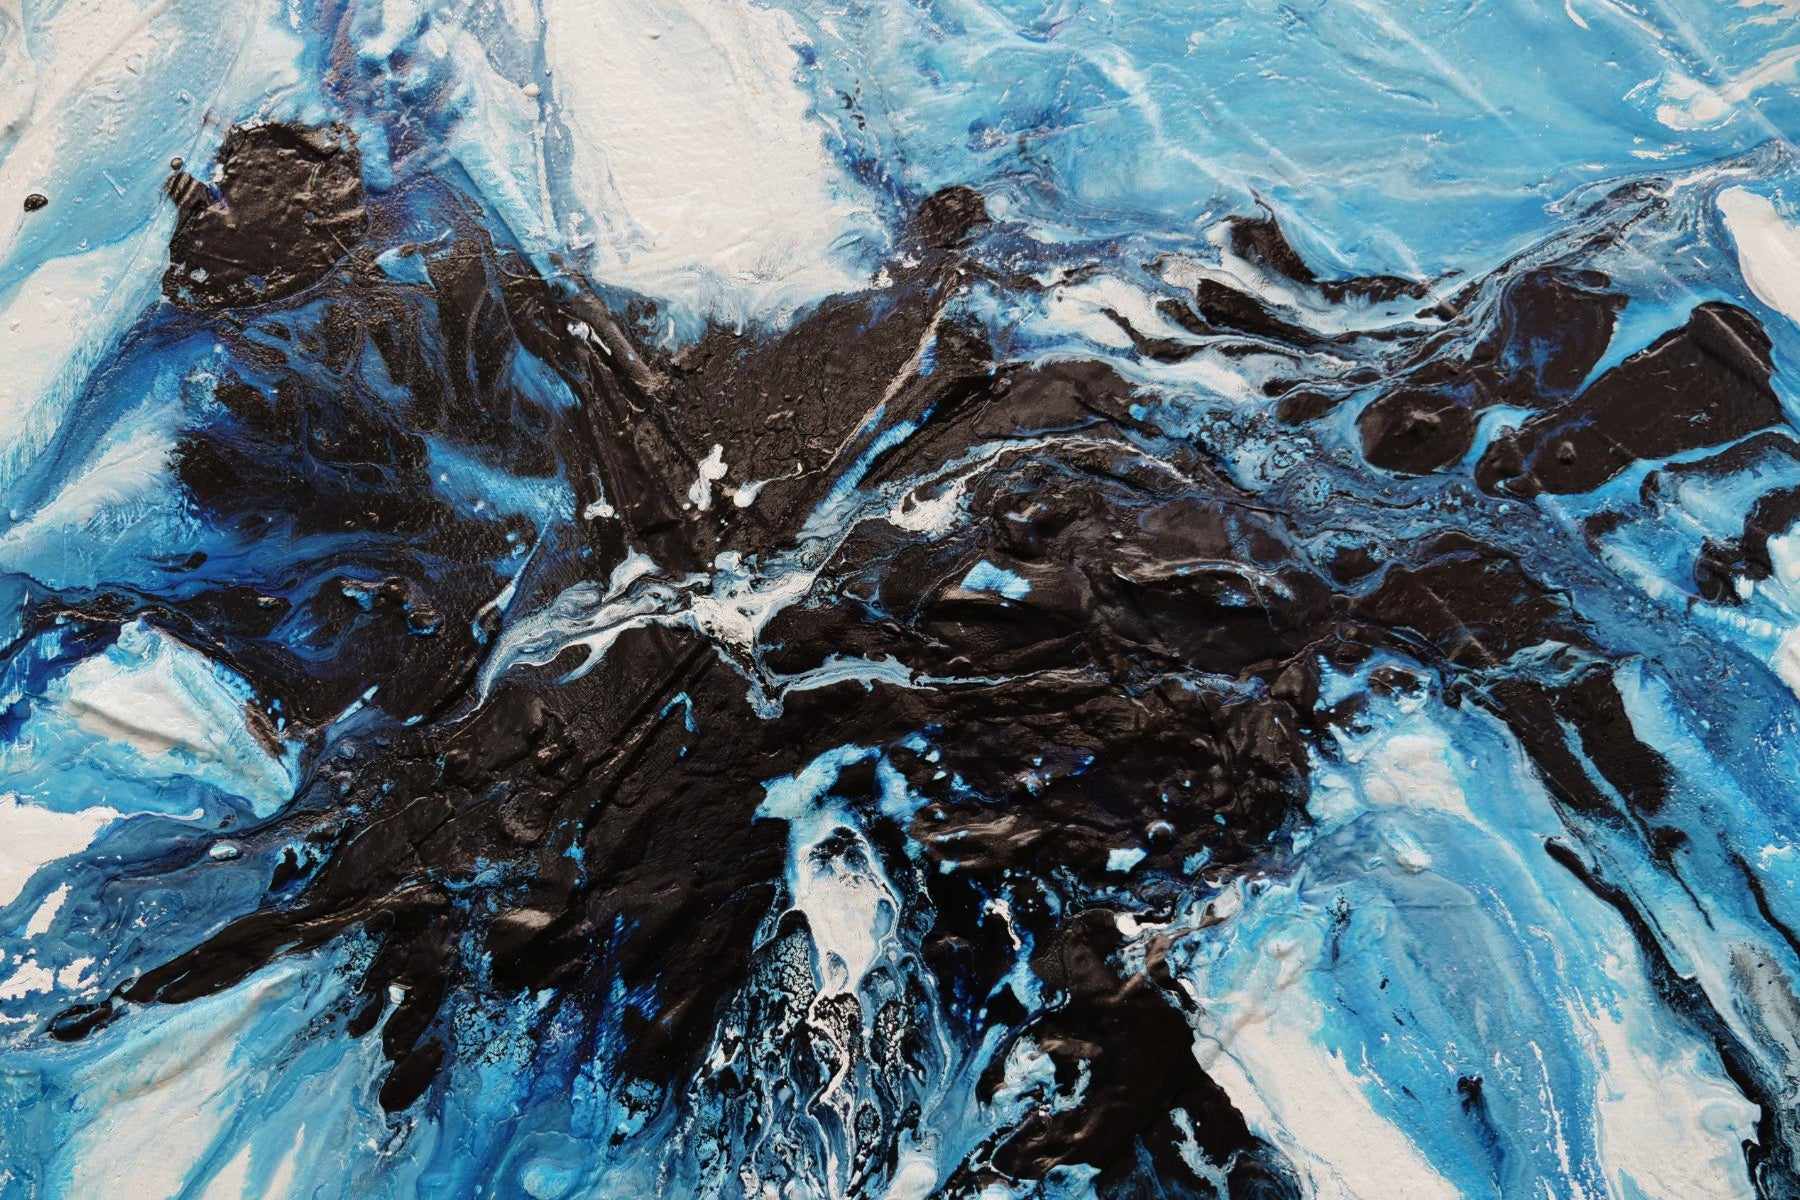 Midnight Ice 190cm x 100cm Blue White Textured Abstract Painting